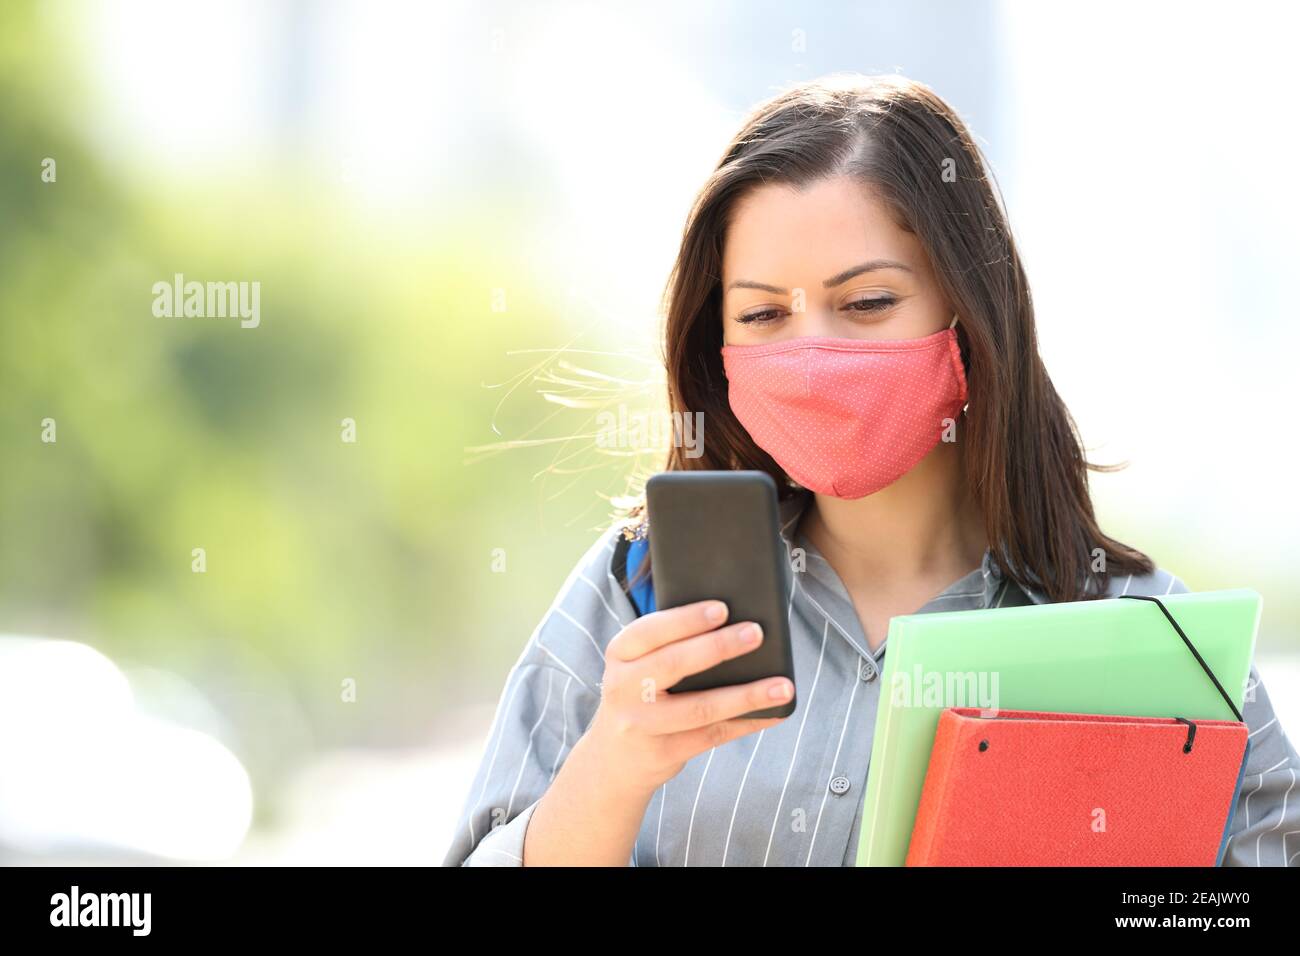 Student with mask using smart phone in the street Stock Photo